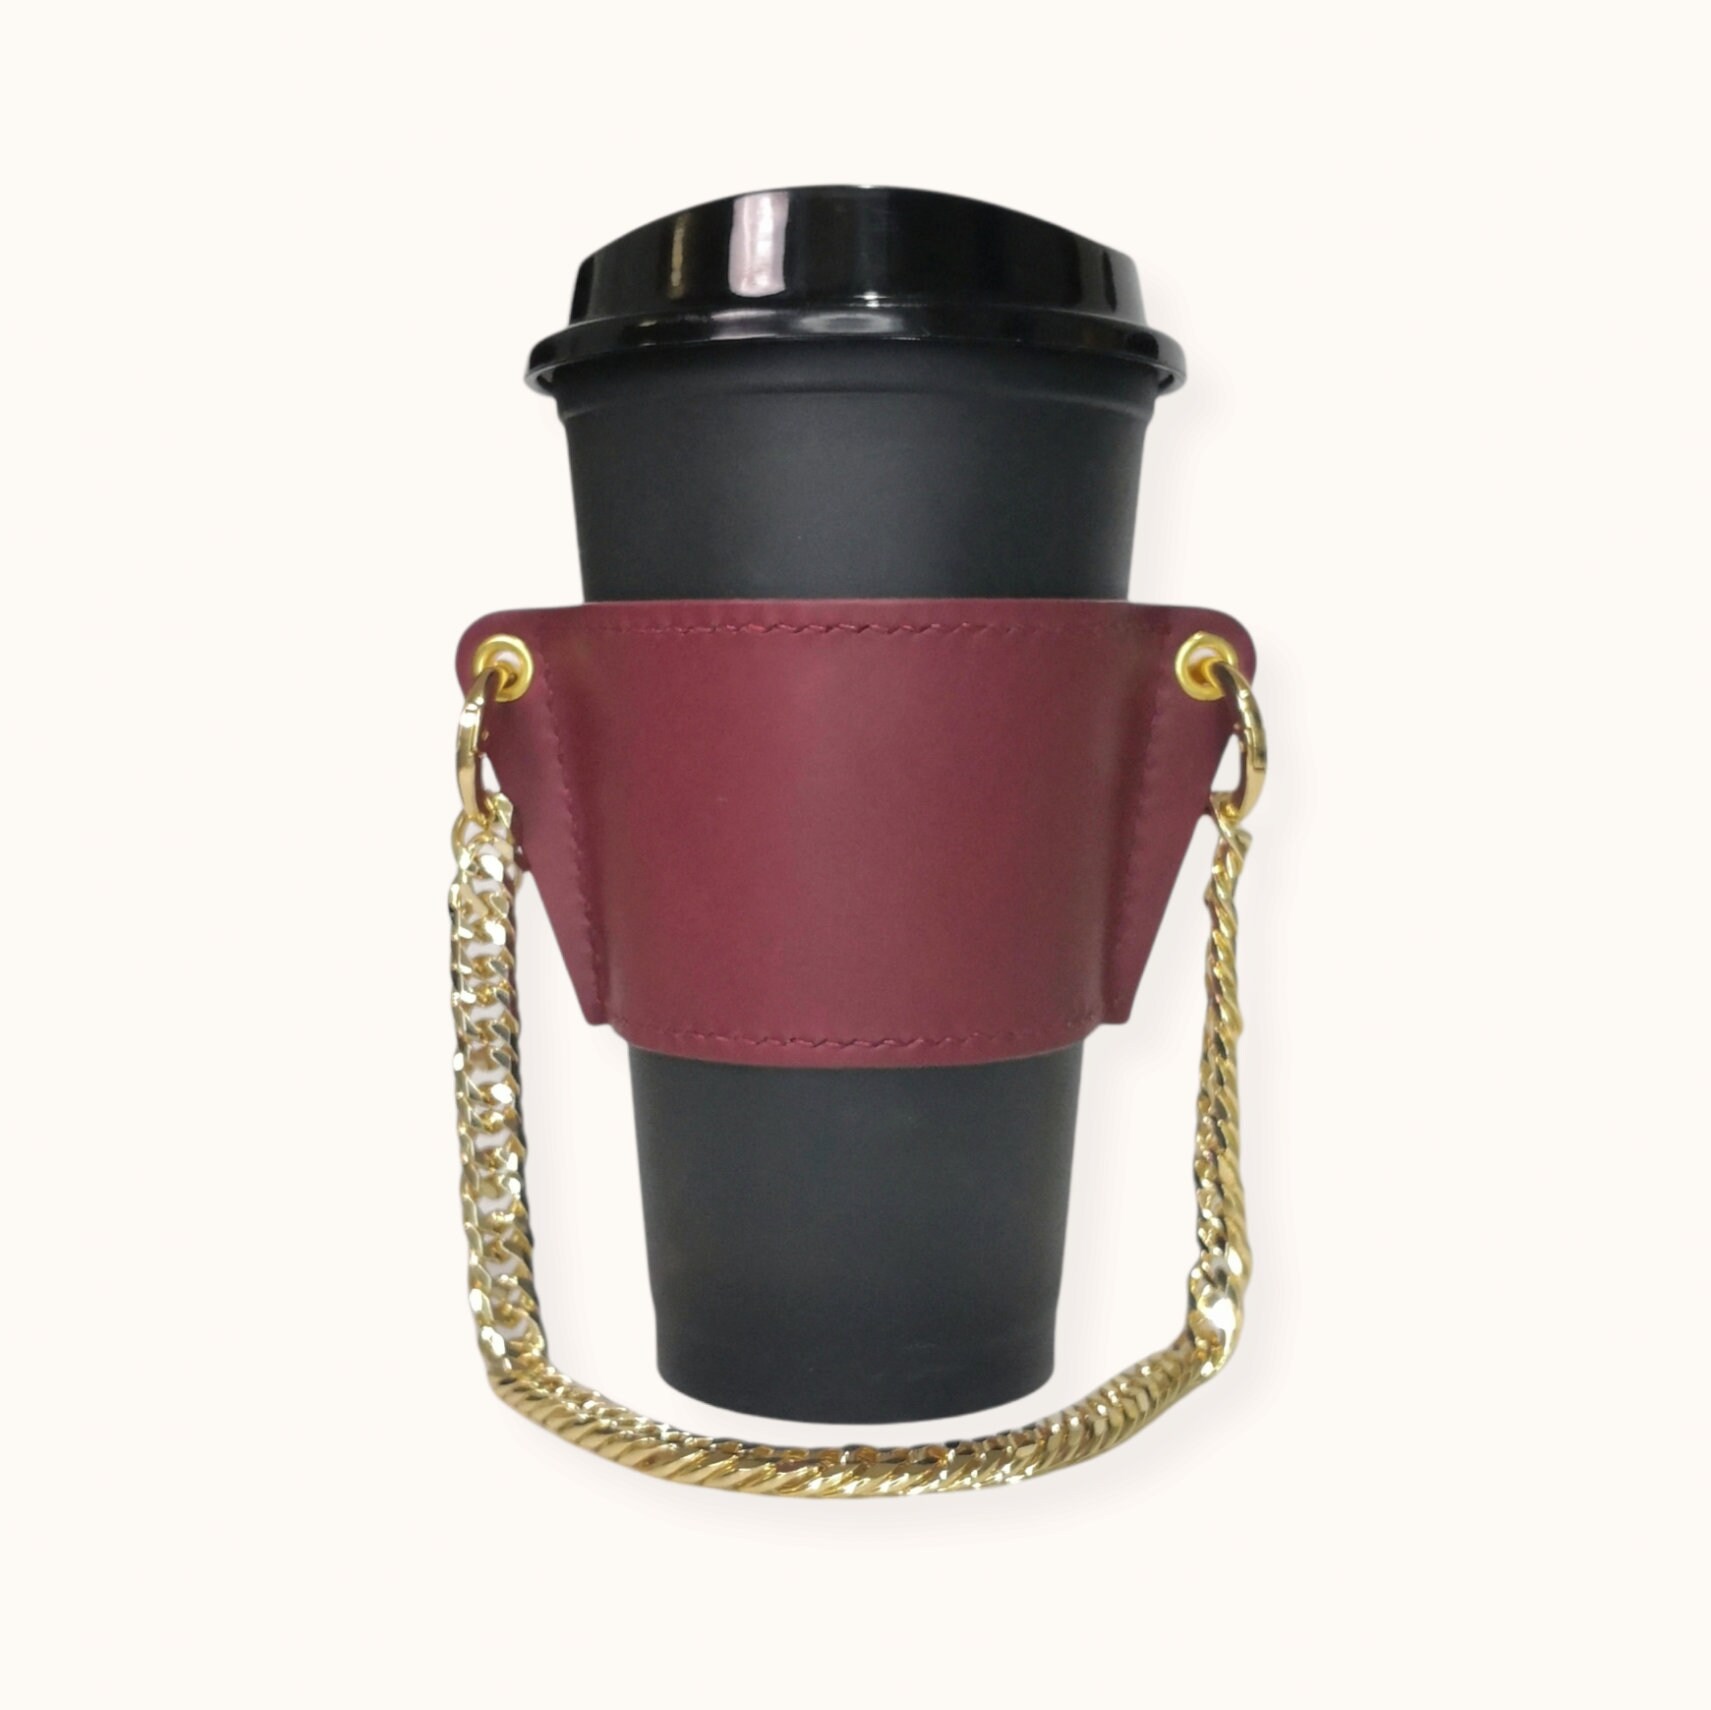 LEATHER Reusable Cupholder & Chain – Handmade Coffee Cup Holder Sleeve –  Burgundy with Bronze Gold Chain Strap Handle – FEM THIRSTY